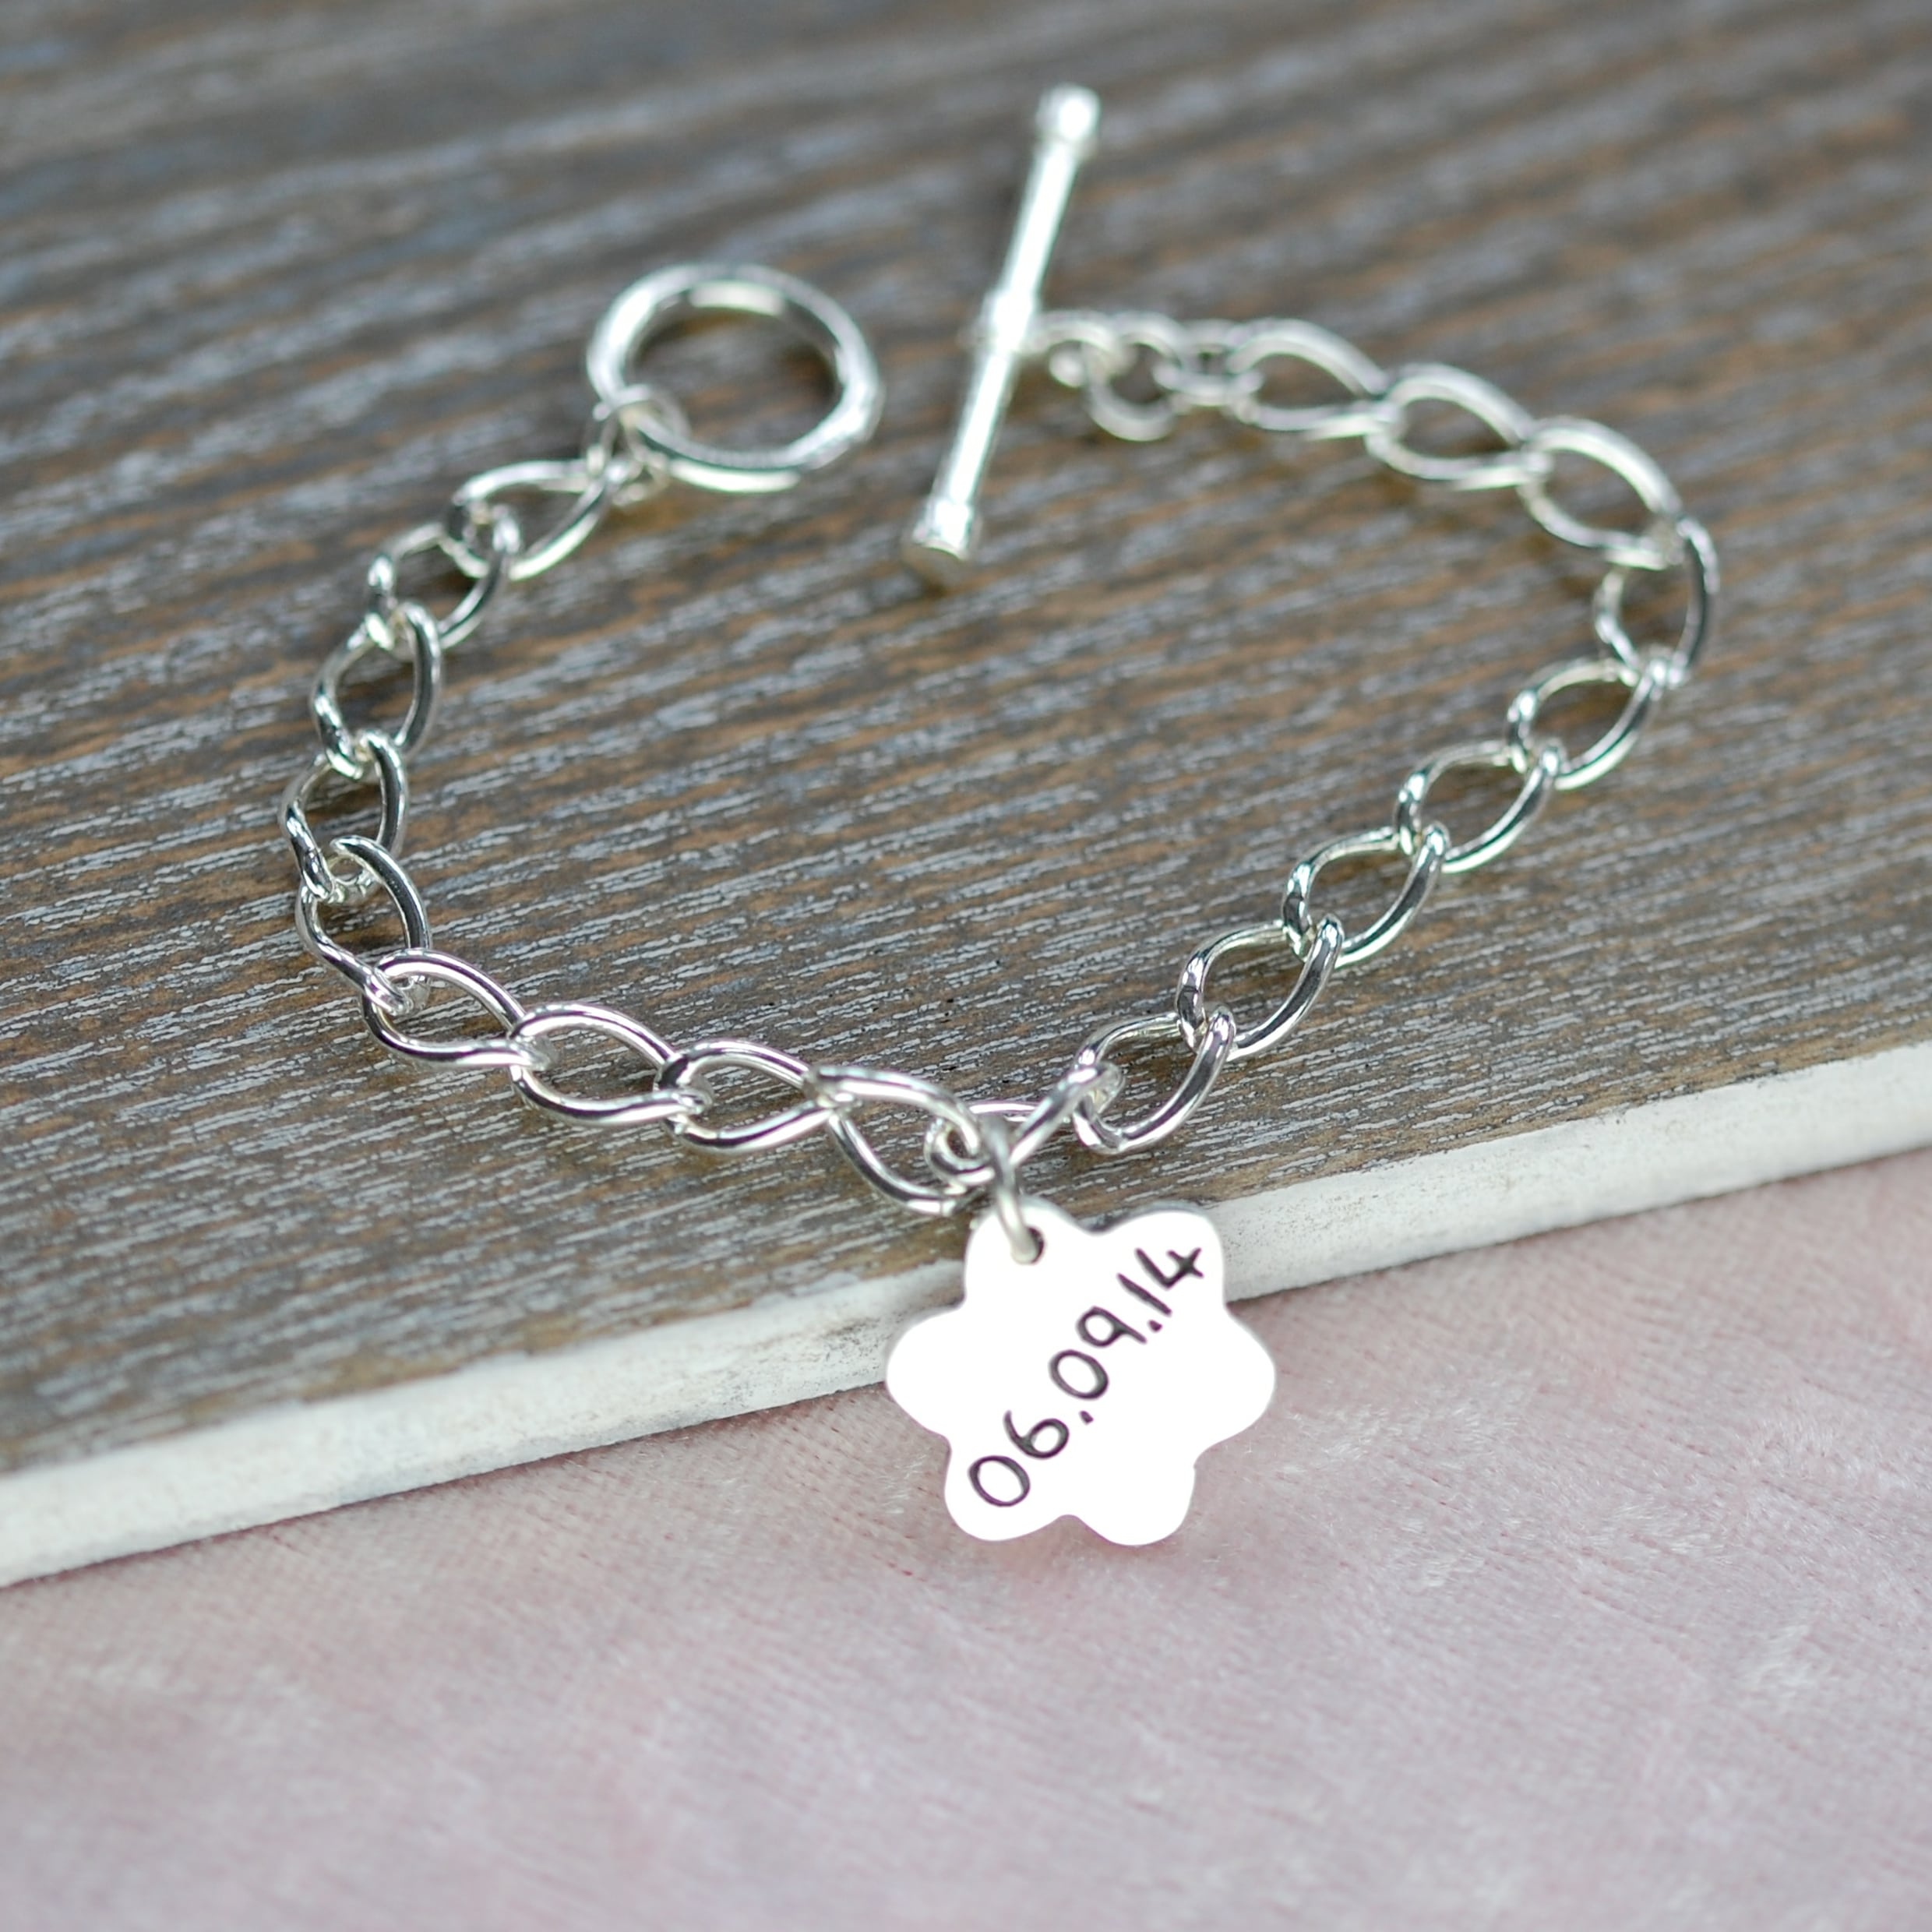 Small sterling silver charm with special date